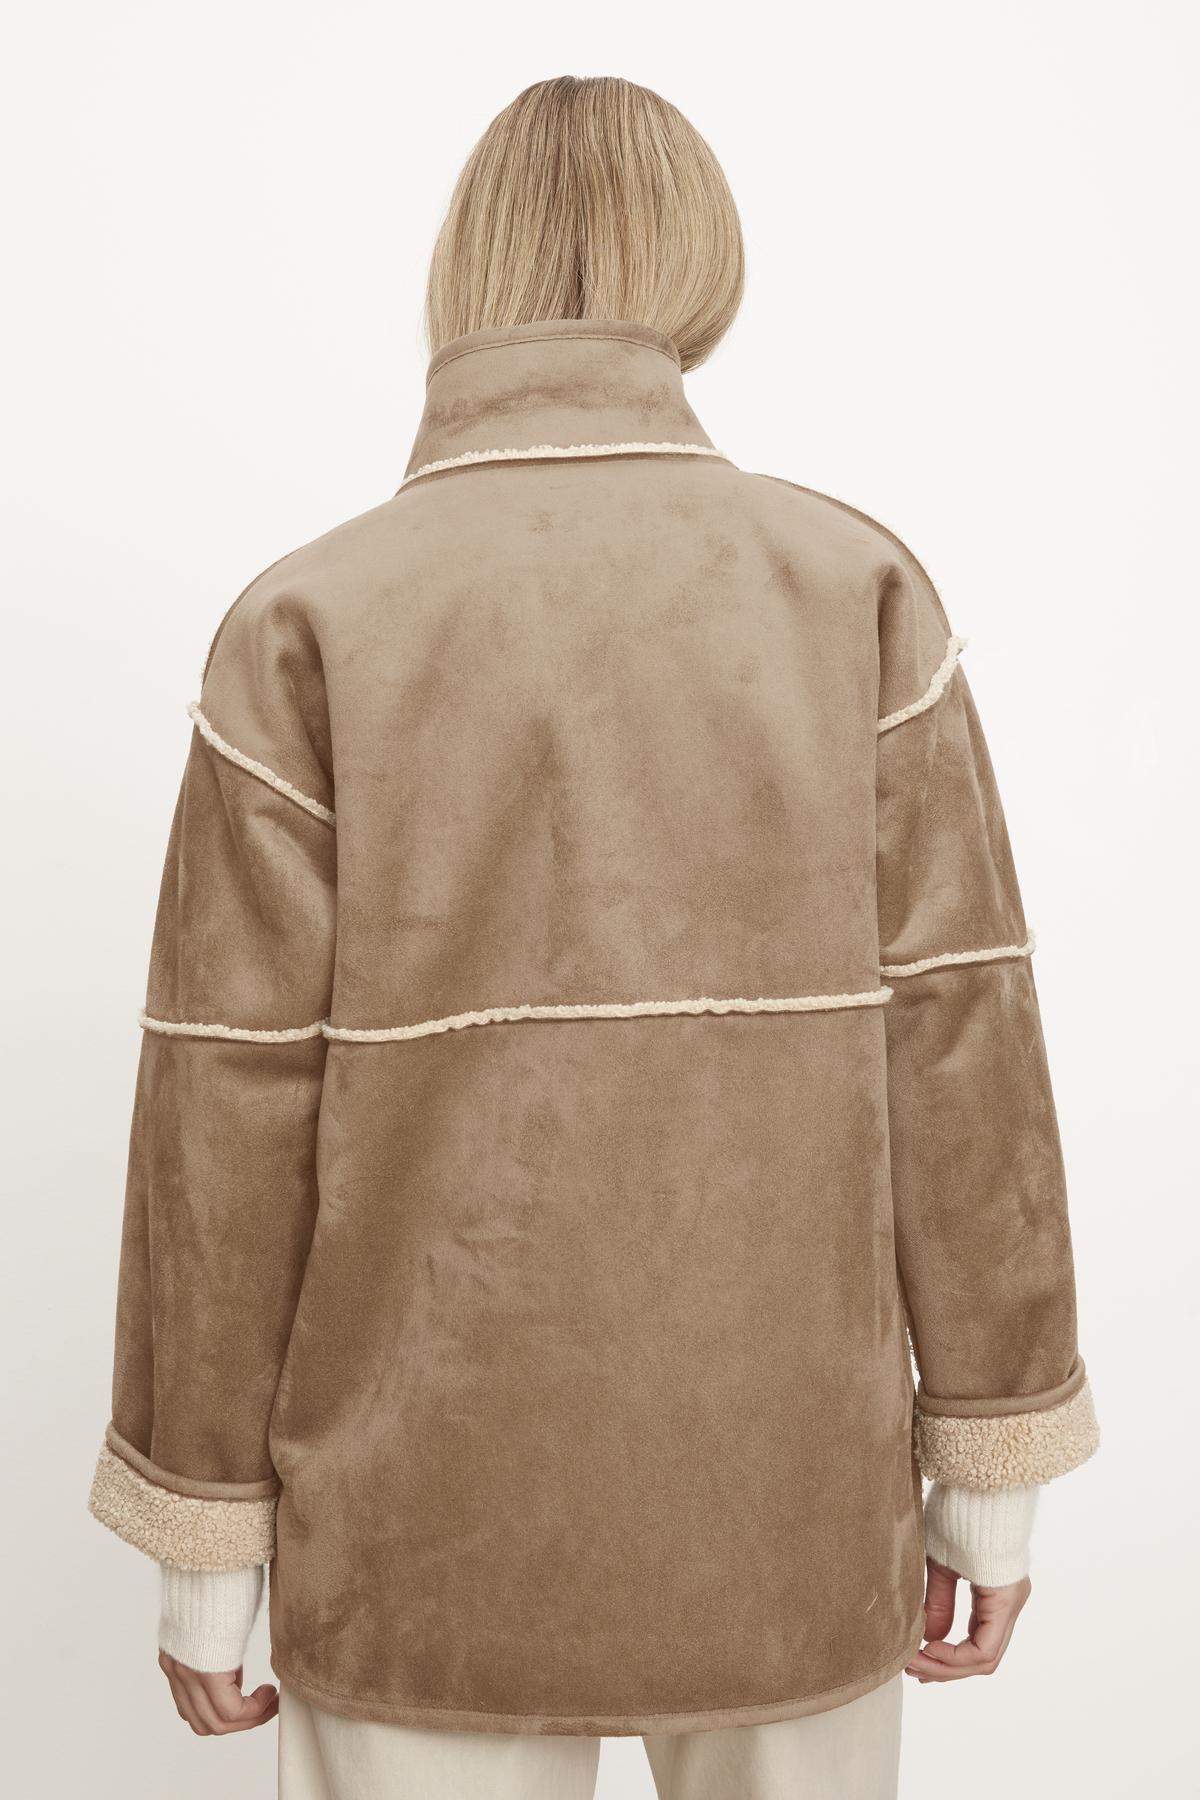 The back view of a woman wearing a Velvet by Graham & Spencer ALBANY LUX SHERPA REVERSIBLE JACKET.-35782611599553